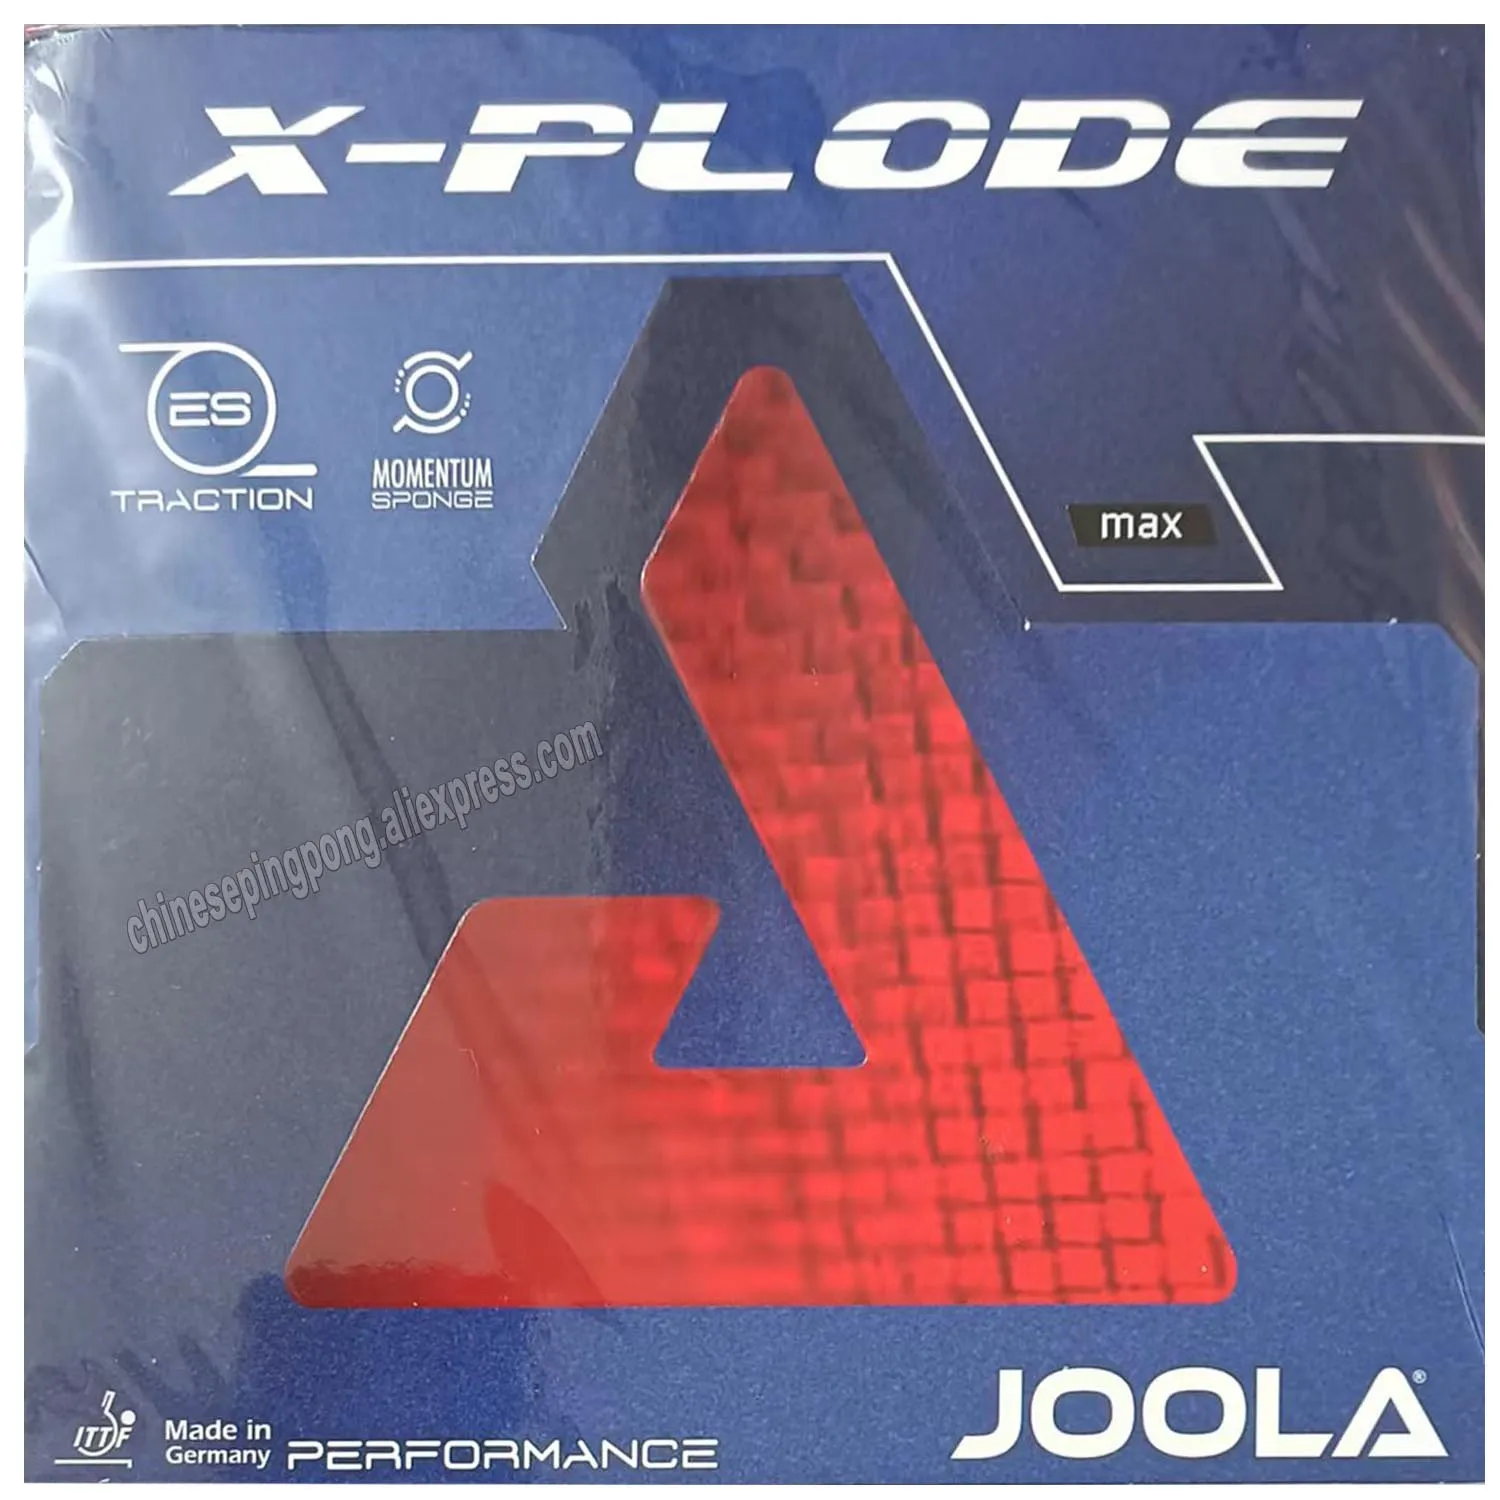 

Original Joola EXPRESS X-plode sensitive table tennis rubber good in speed and spin pimples in for table tennis racket